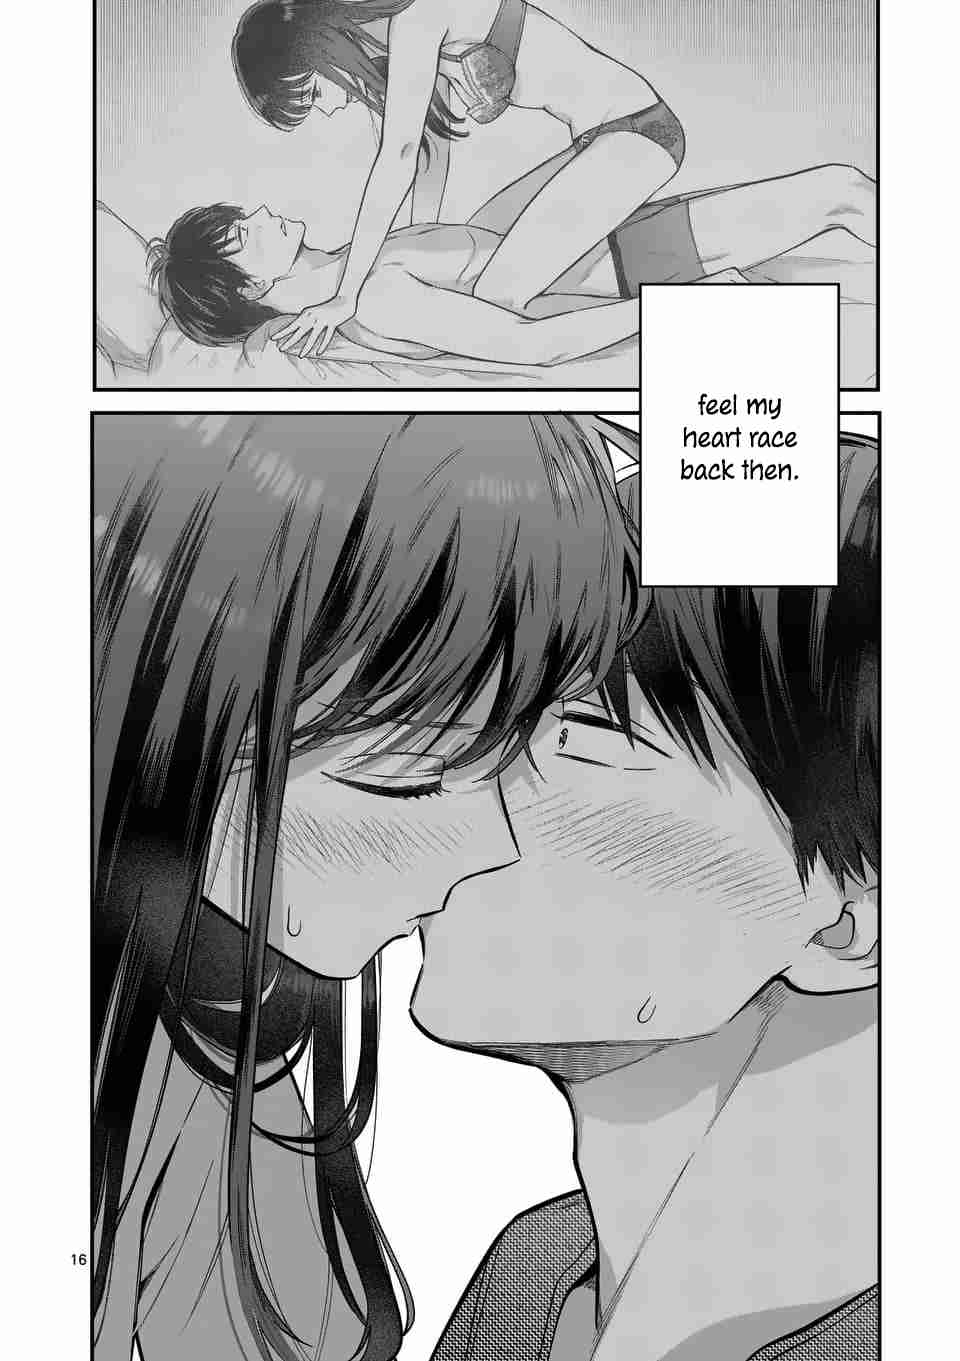 Is It Wrong to Get Done by a Girl? Vol. 1 Ch. 2 Kiss